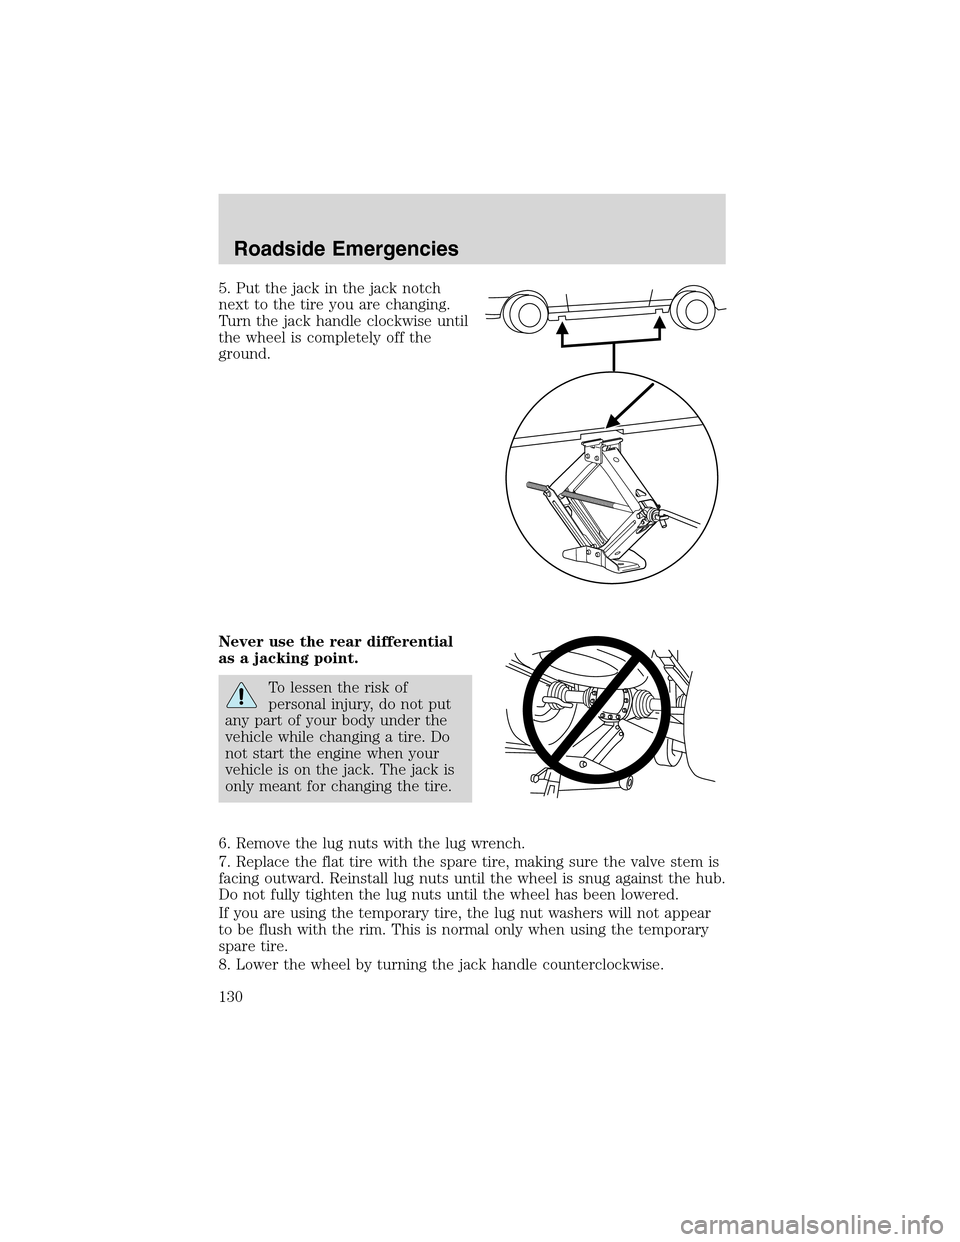 FORD THUNDERBIRD 2003 11.G Owners Manual 5. Put the jack in the jack notch
next to the tire you are changing.
Turn the jack handle clockwise until
the wheel is completely off the
ground.
Never use the rear differential
as a jacking point.
To